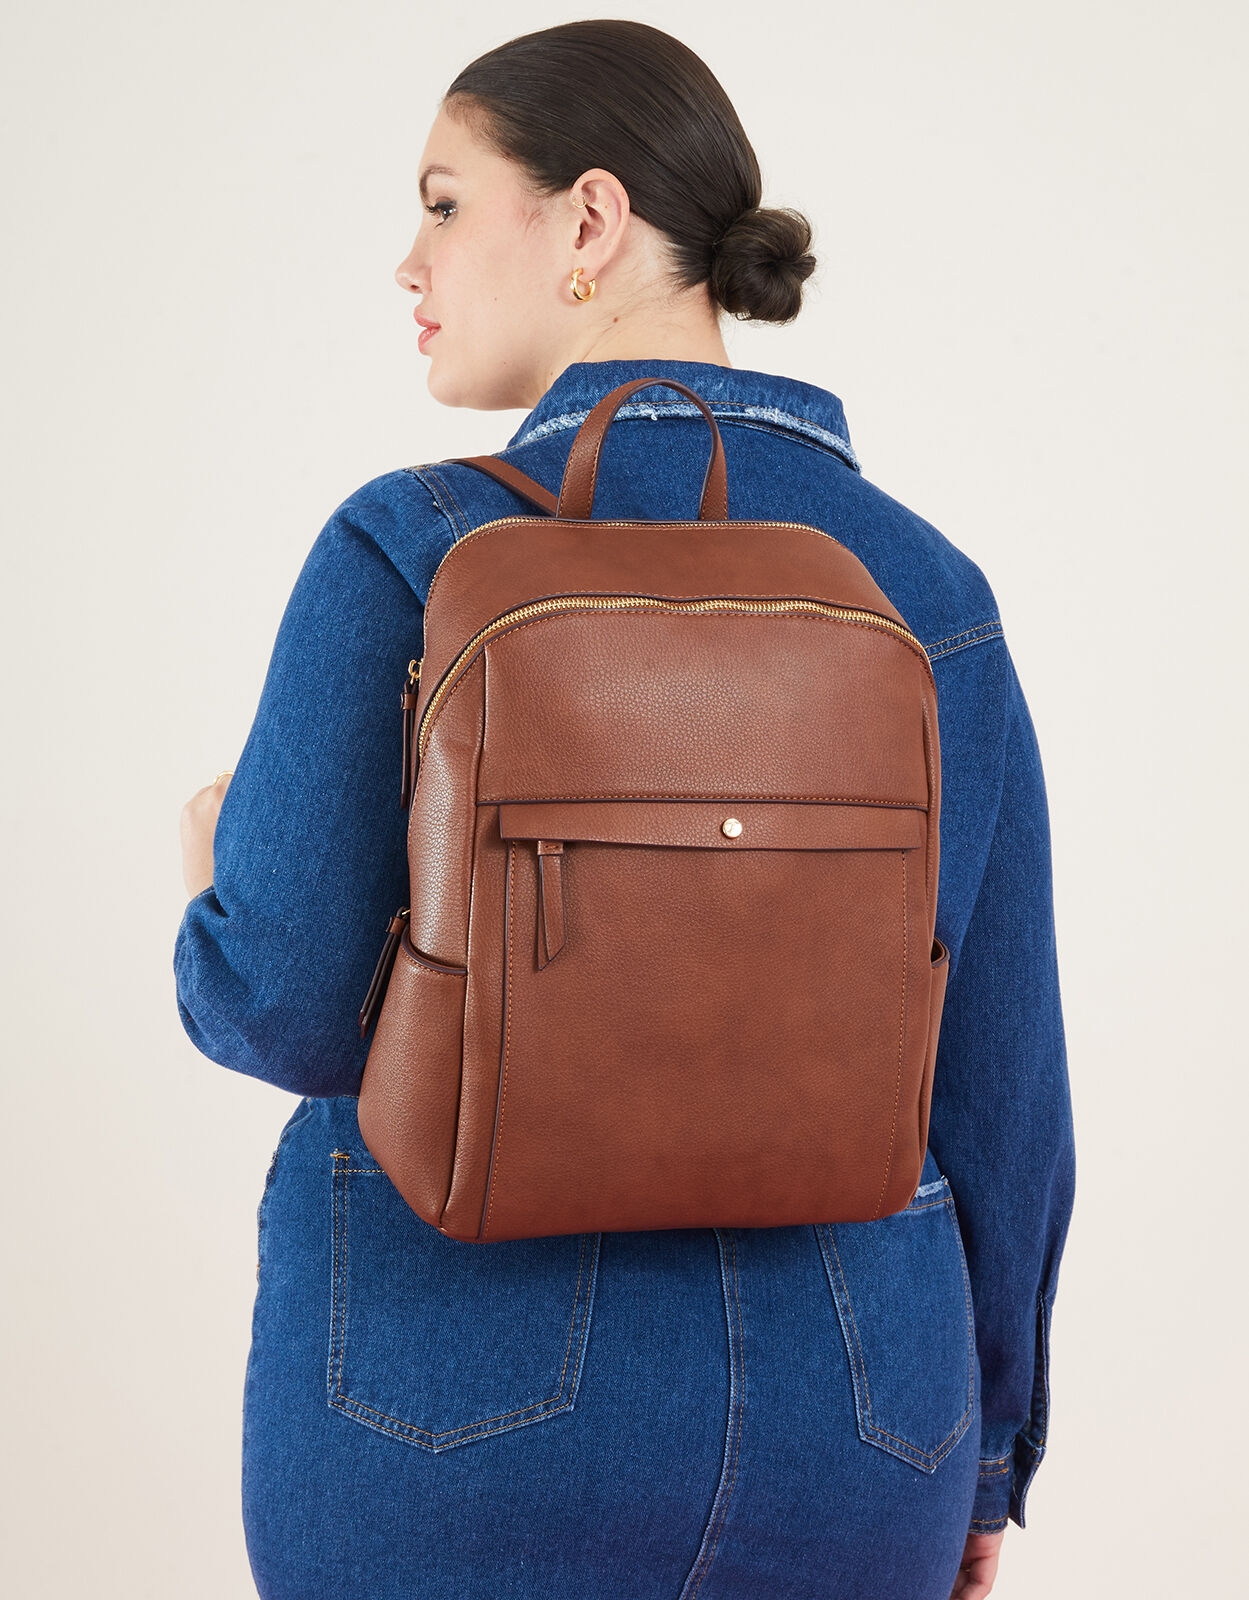 Accessorize JH732 Lovely claret coloured backpack PU w suedette patch Accessorize London VGC 